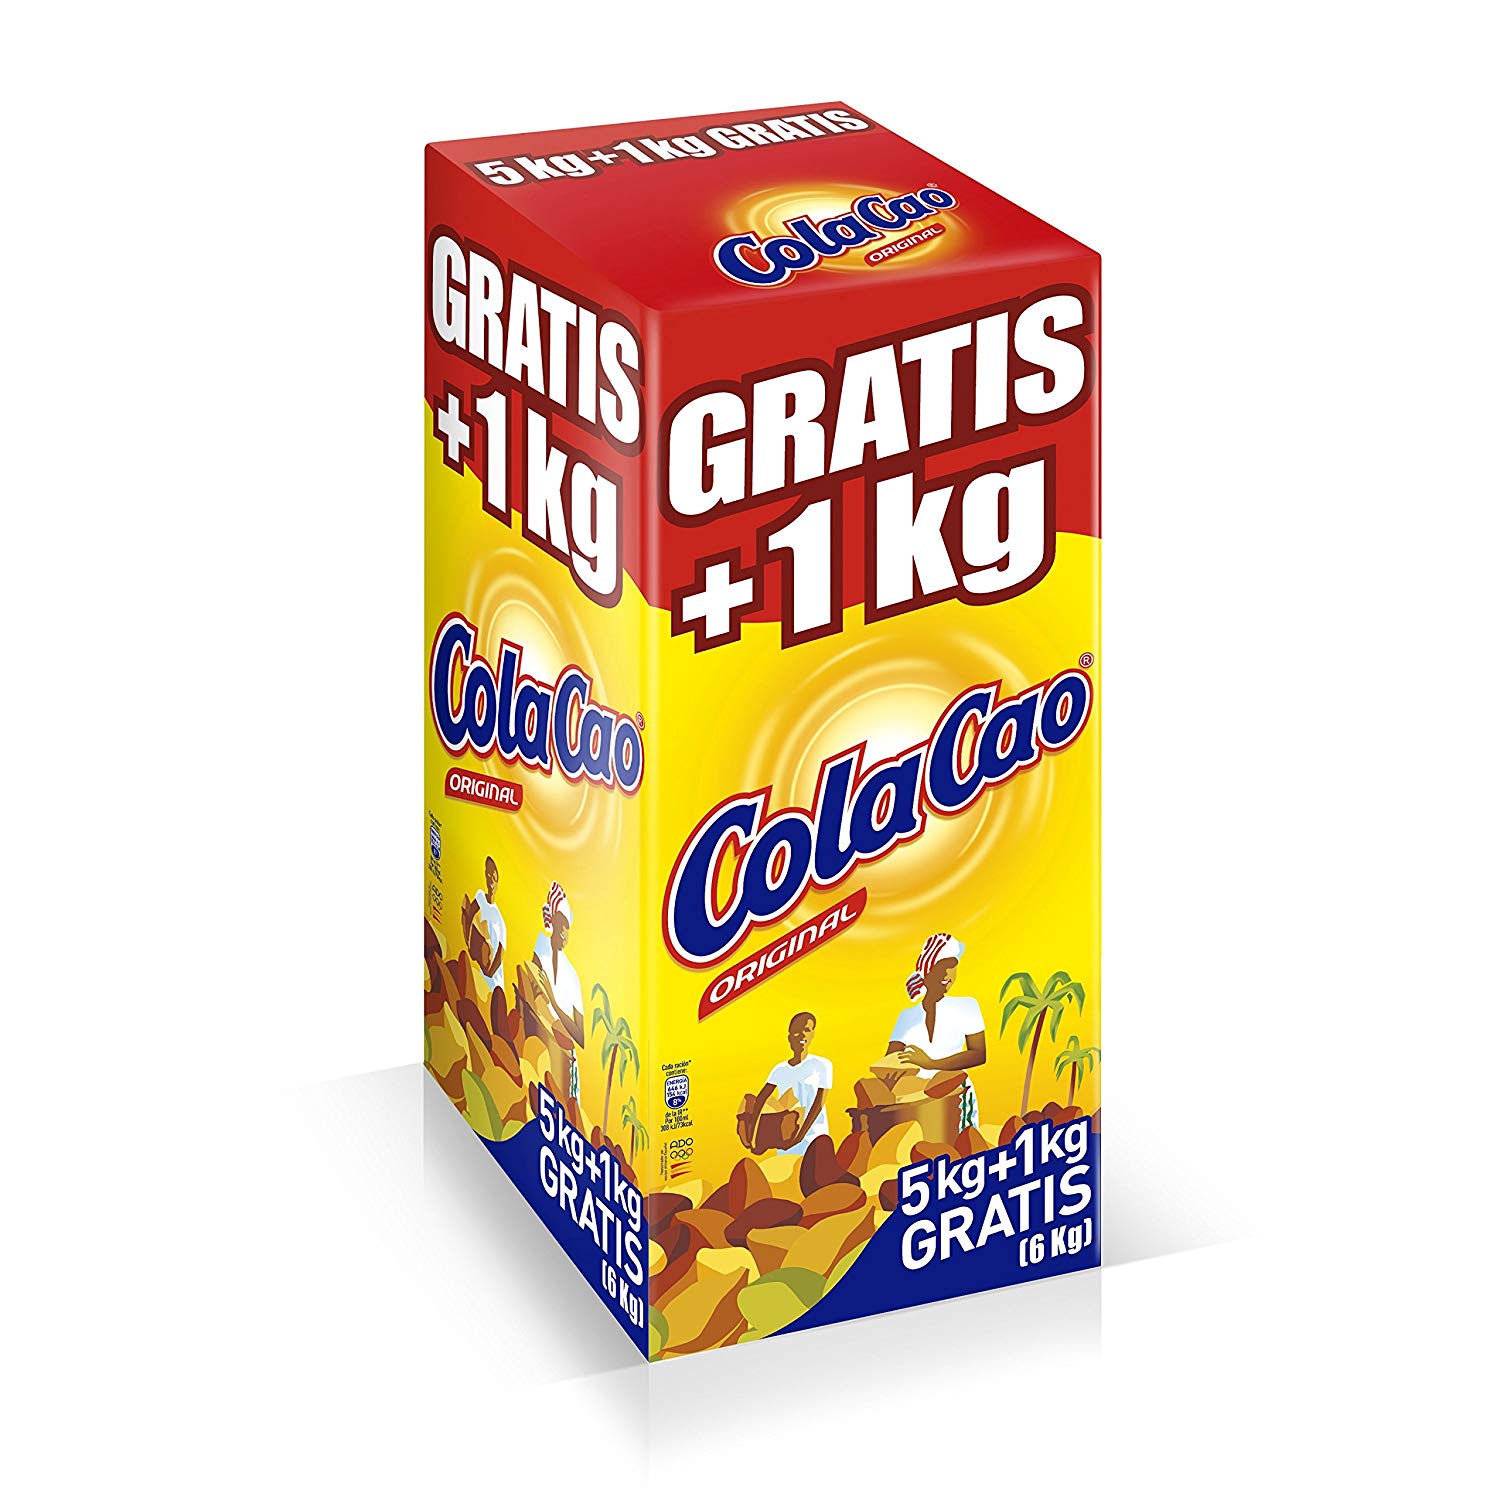 ColaCao soluble 6kg solo 19,8€